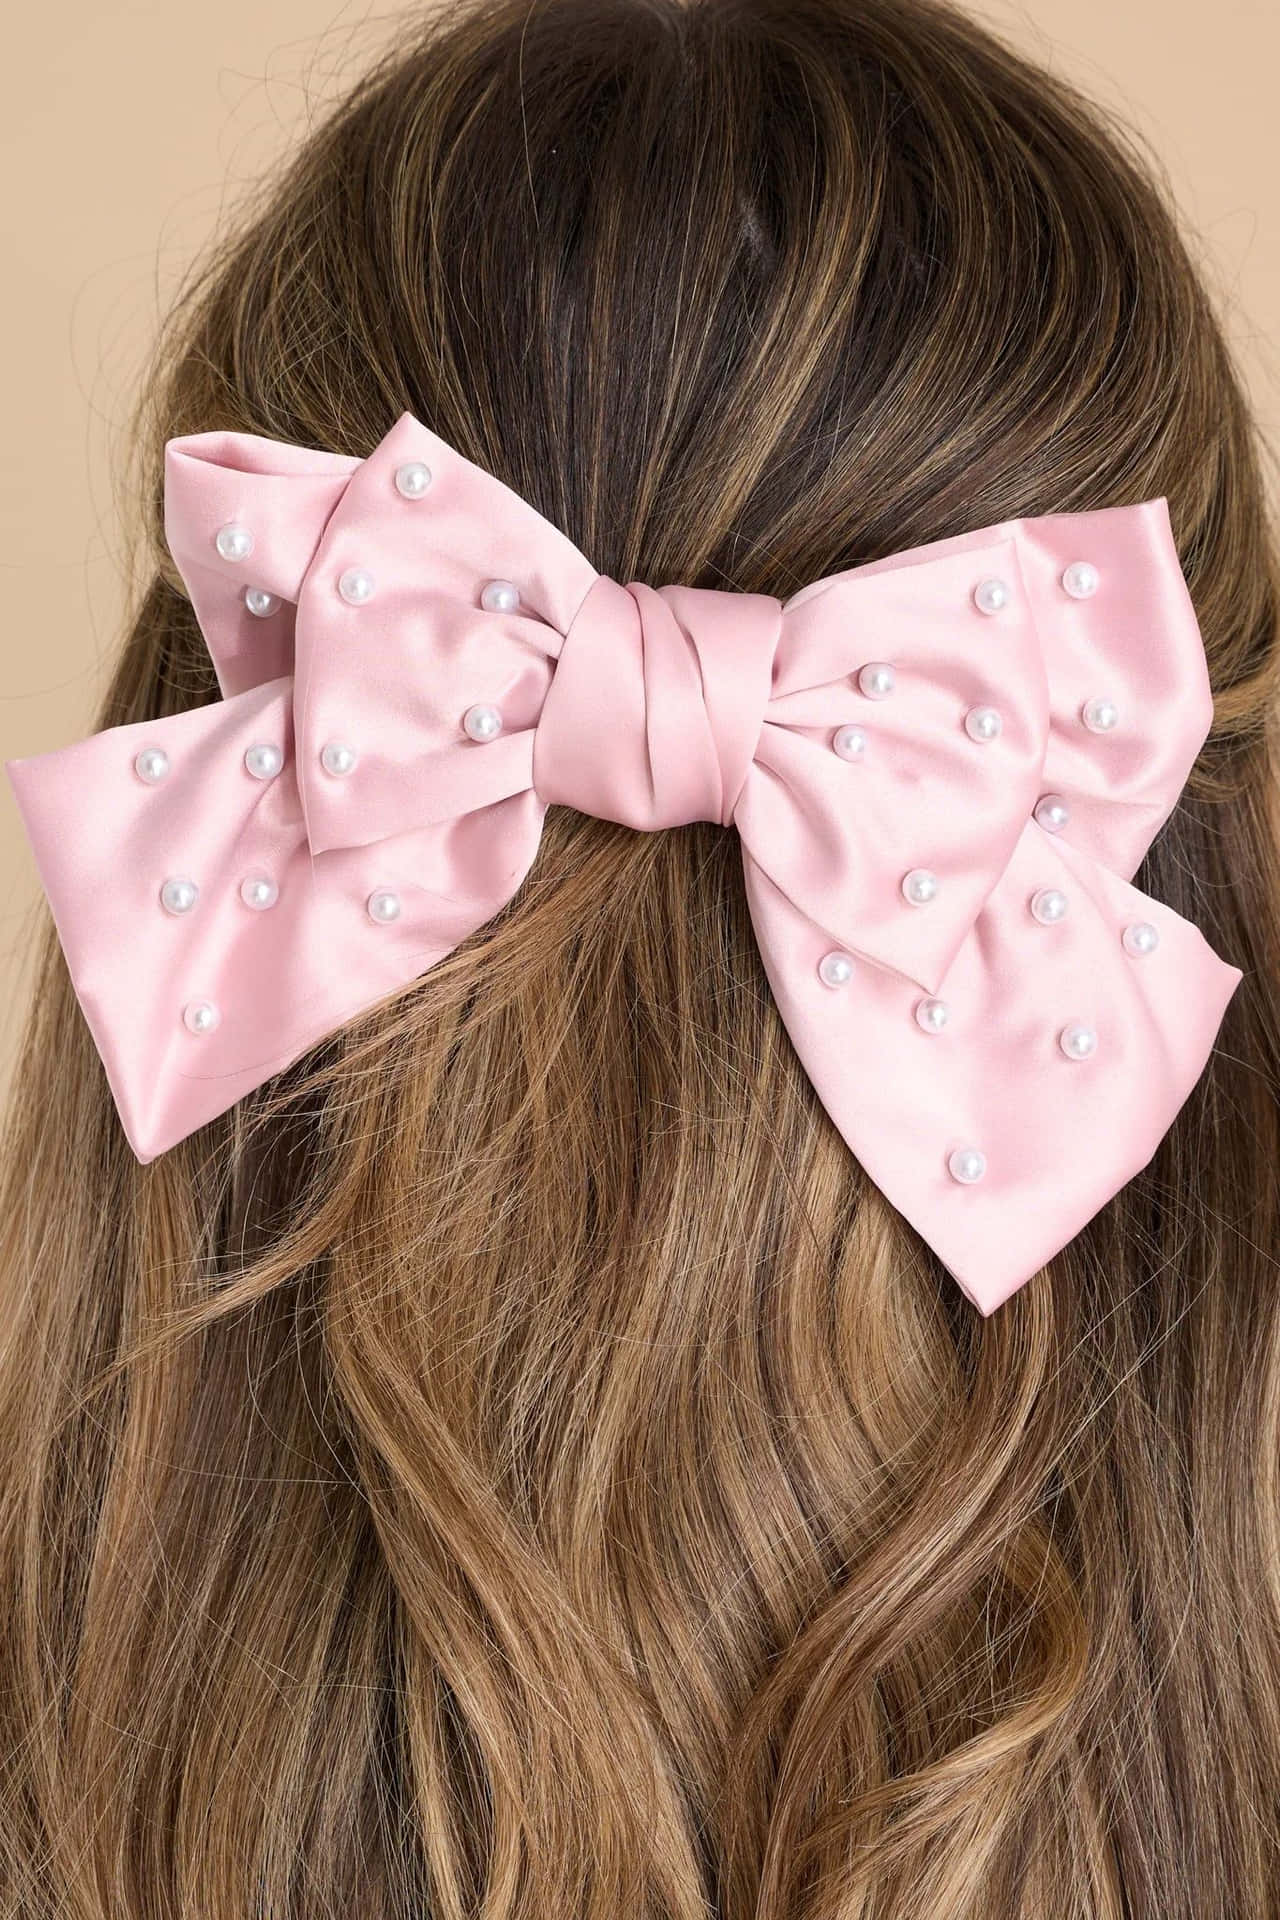 Pearl Embellished Pink Bow Hair Accessory Wallpaper